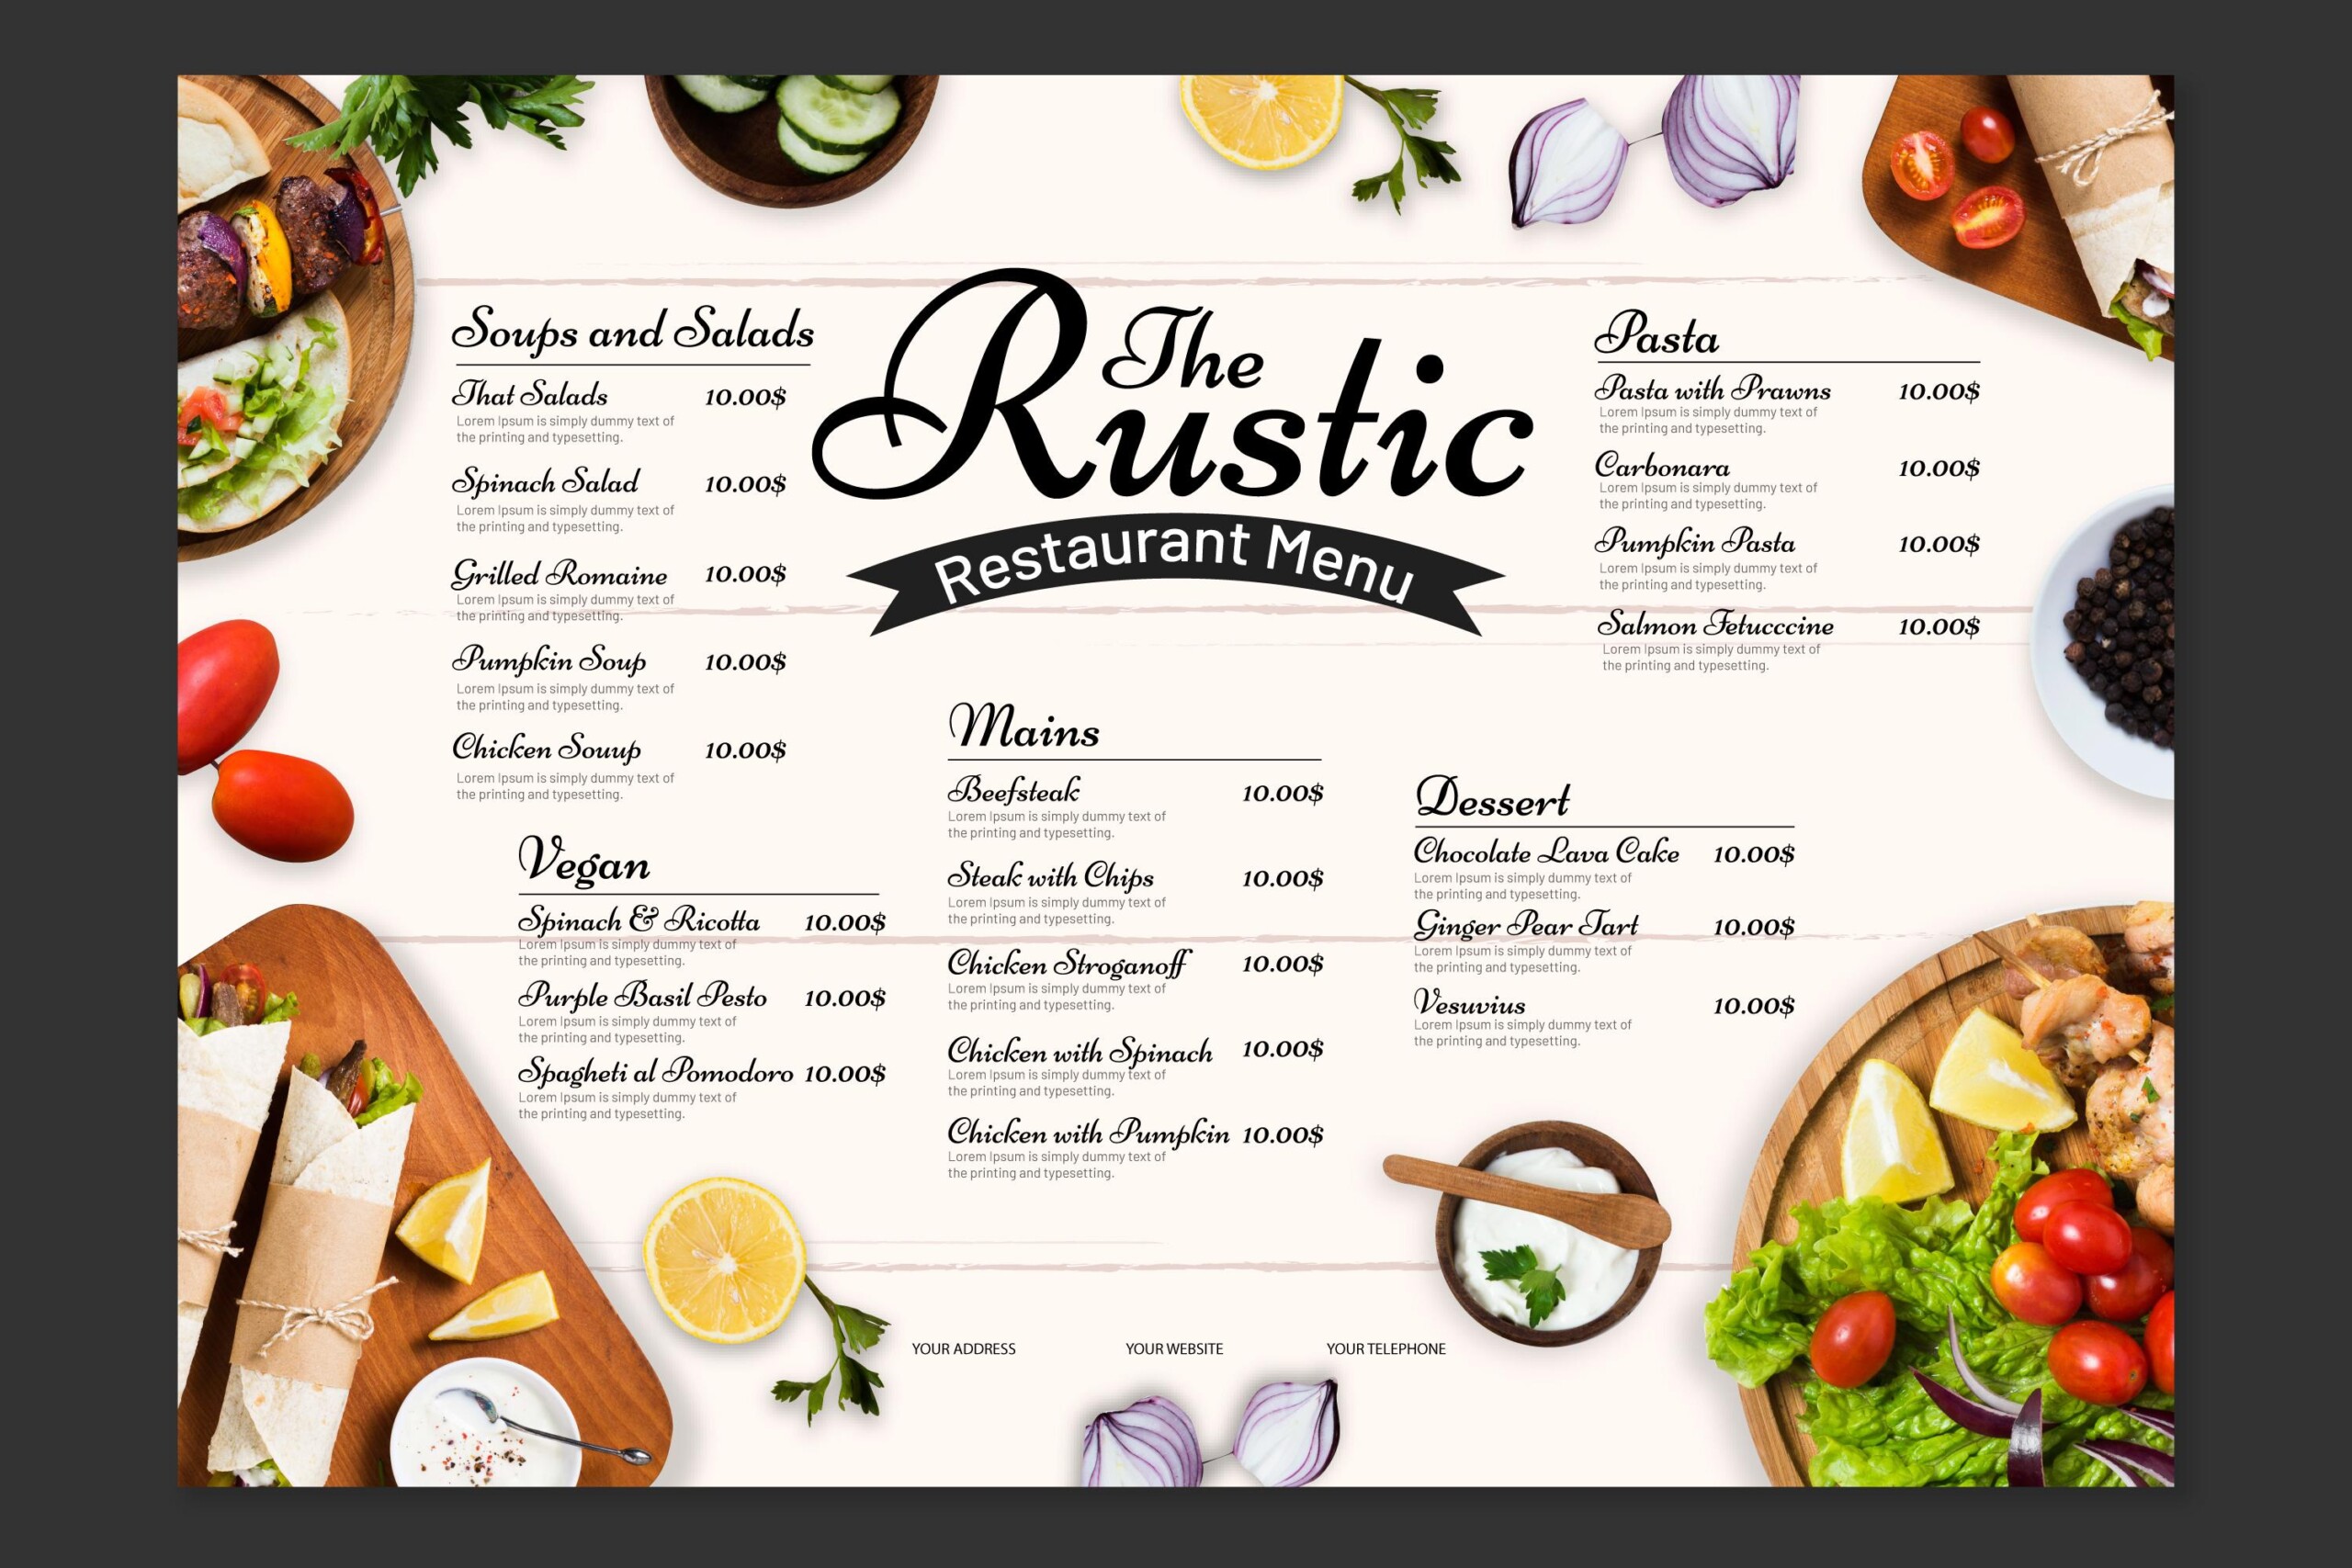 Have Your Menus Designed by the Experienced Graphic Design Team at Streamline Print and Design.